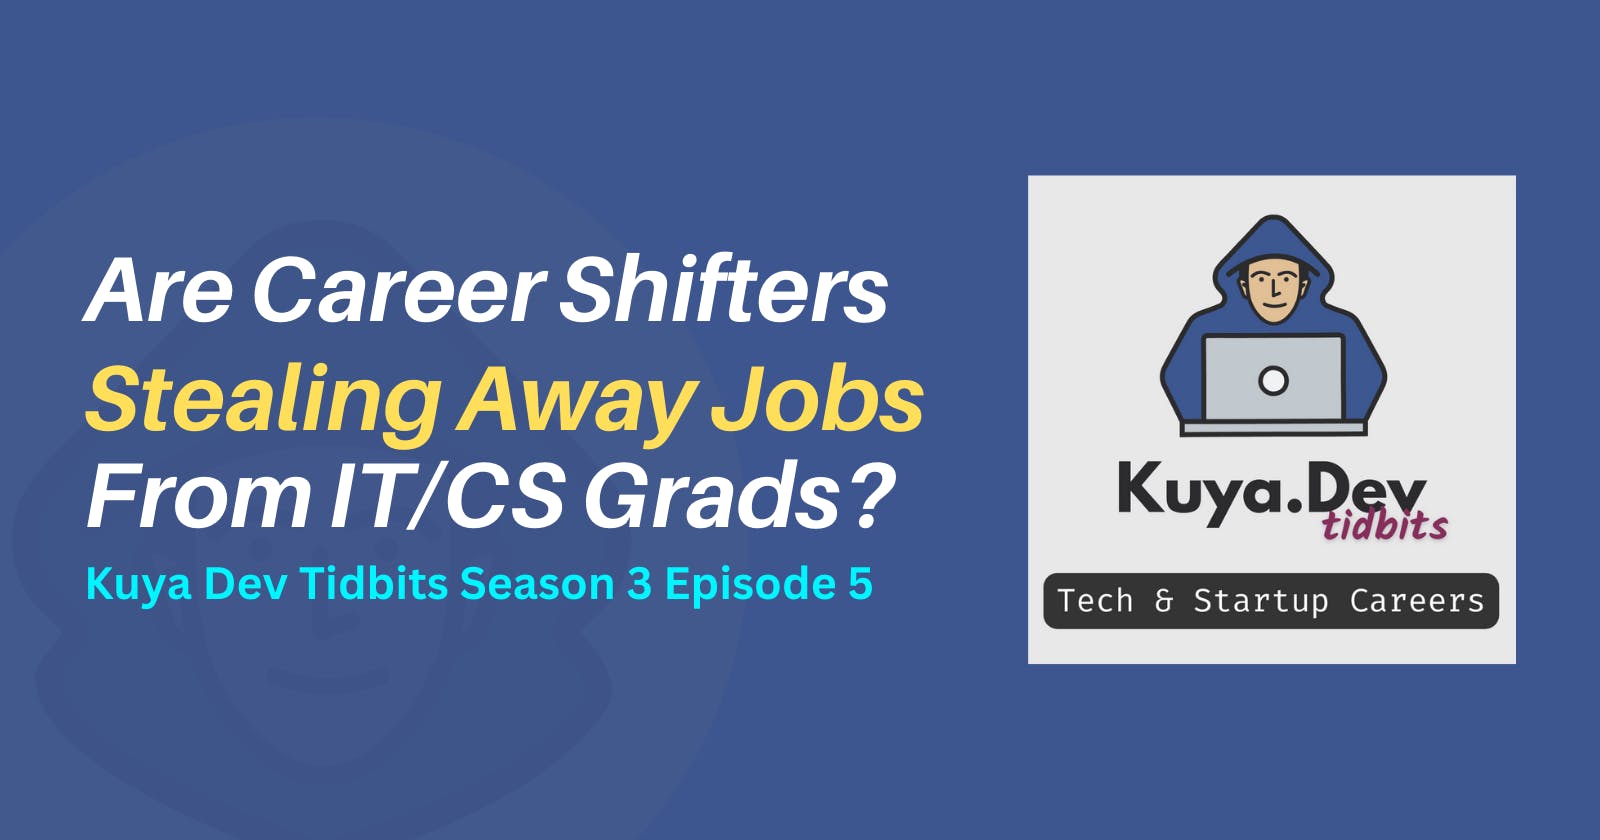 Are Career Shifters Stealing Away Jobs from IT/CS College Graduates